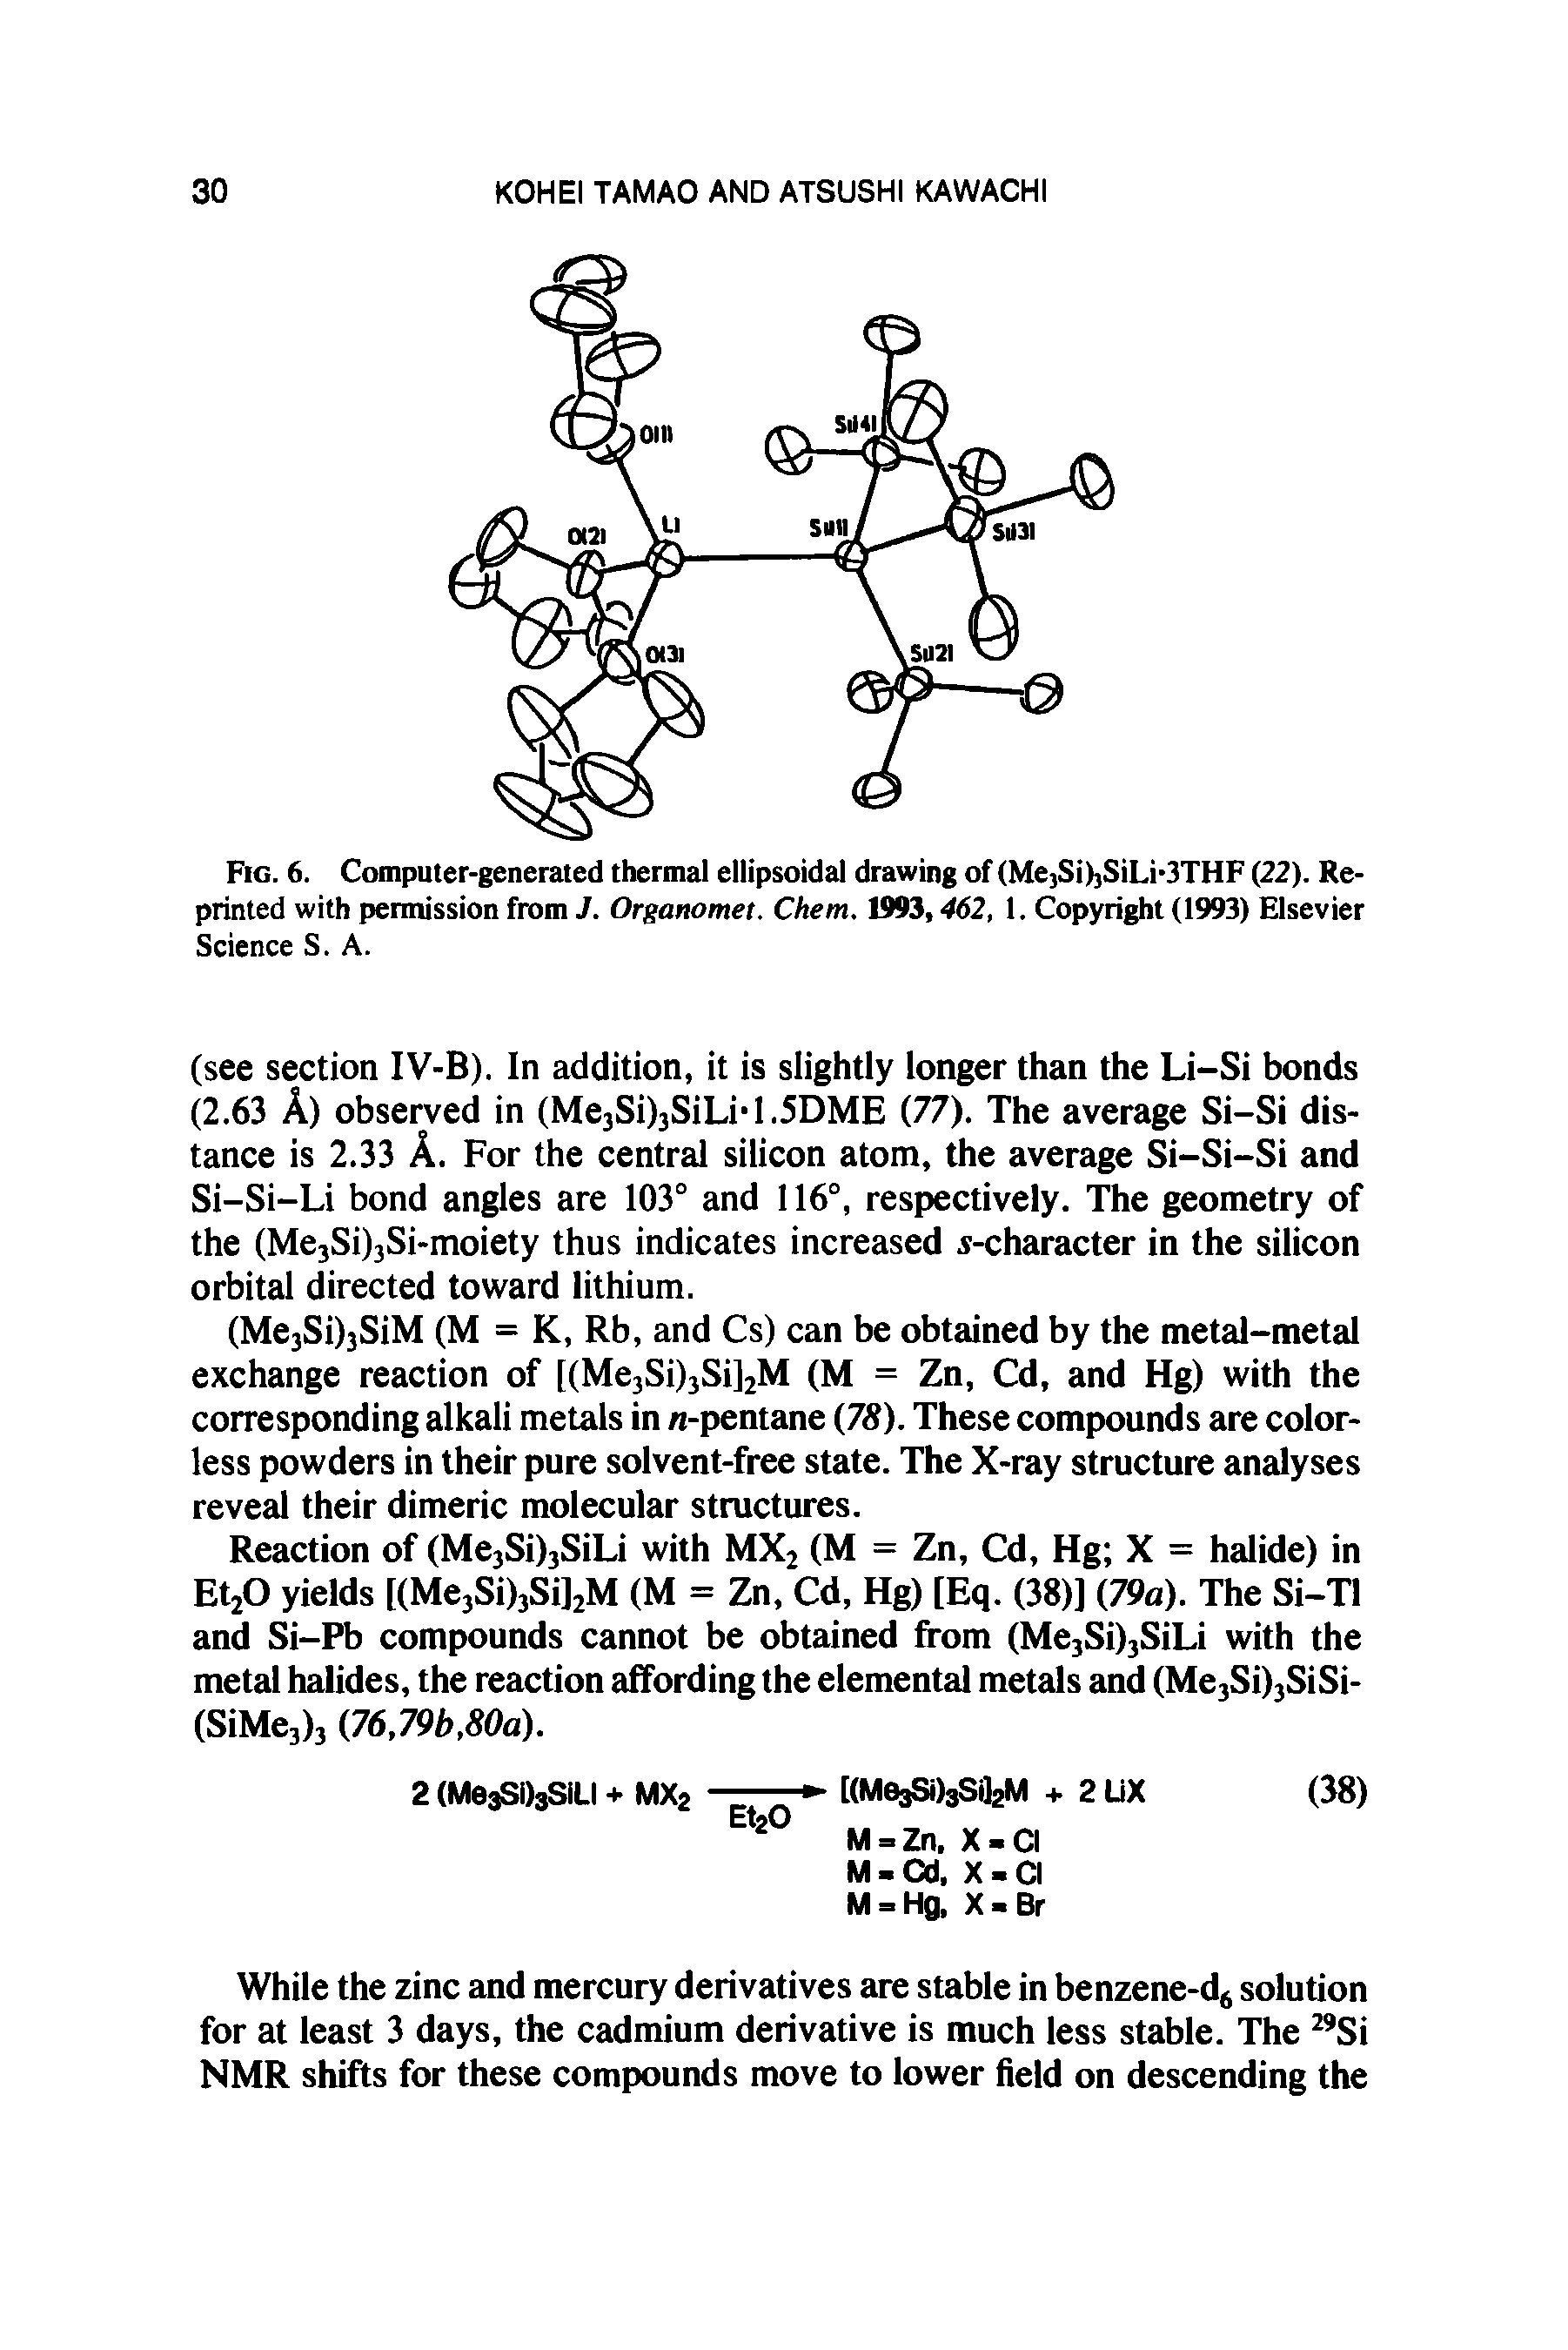 Fig. 6. Computer-generated thermal ellipsoidal drawing of (Me3Si>3SiLi 3THF (22). Reprinted with permission from J. Organomet. Chem. 1993,462, I. Copyright (1993) Elsevier Science S. A.